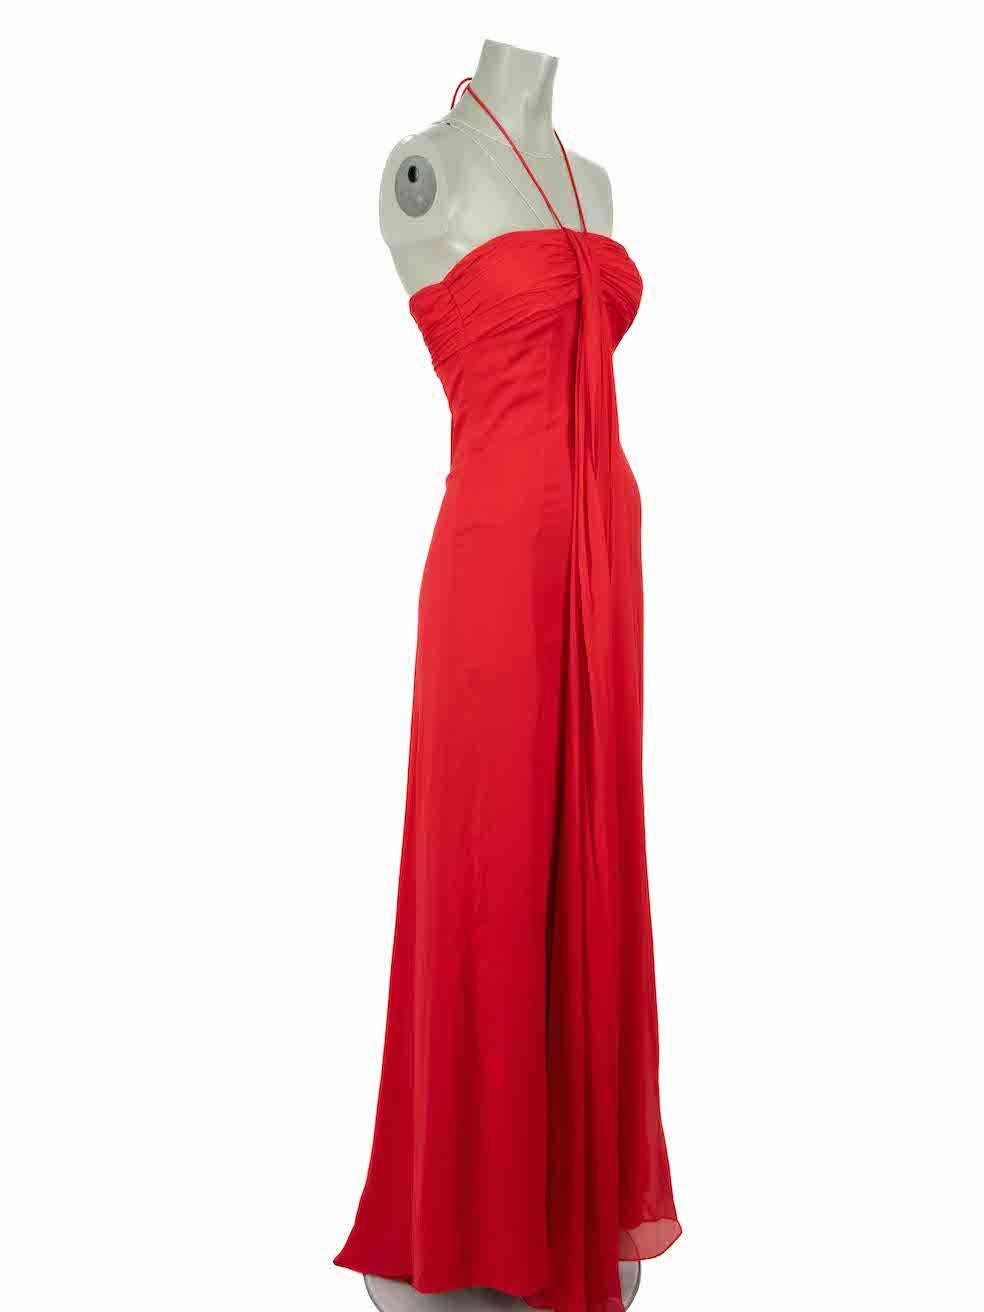 CONDITION is Very good. Minimal wear to dress is evident. Minor loose threads to bust and slight pull in fabric on this used Valentino designer resale item.
 
 Details
 Red
 Silk
 Maxi gown
 Drape accent
 Strapless
 Side zip closure
 
 Made in